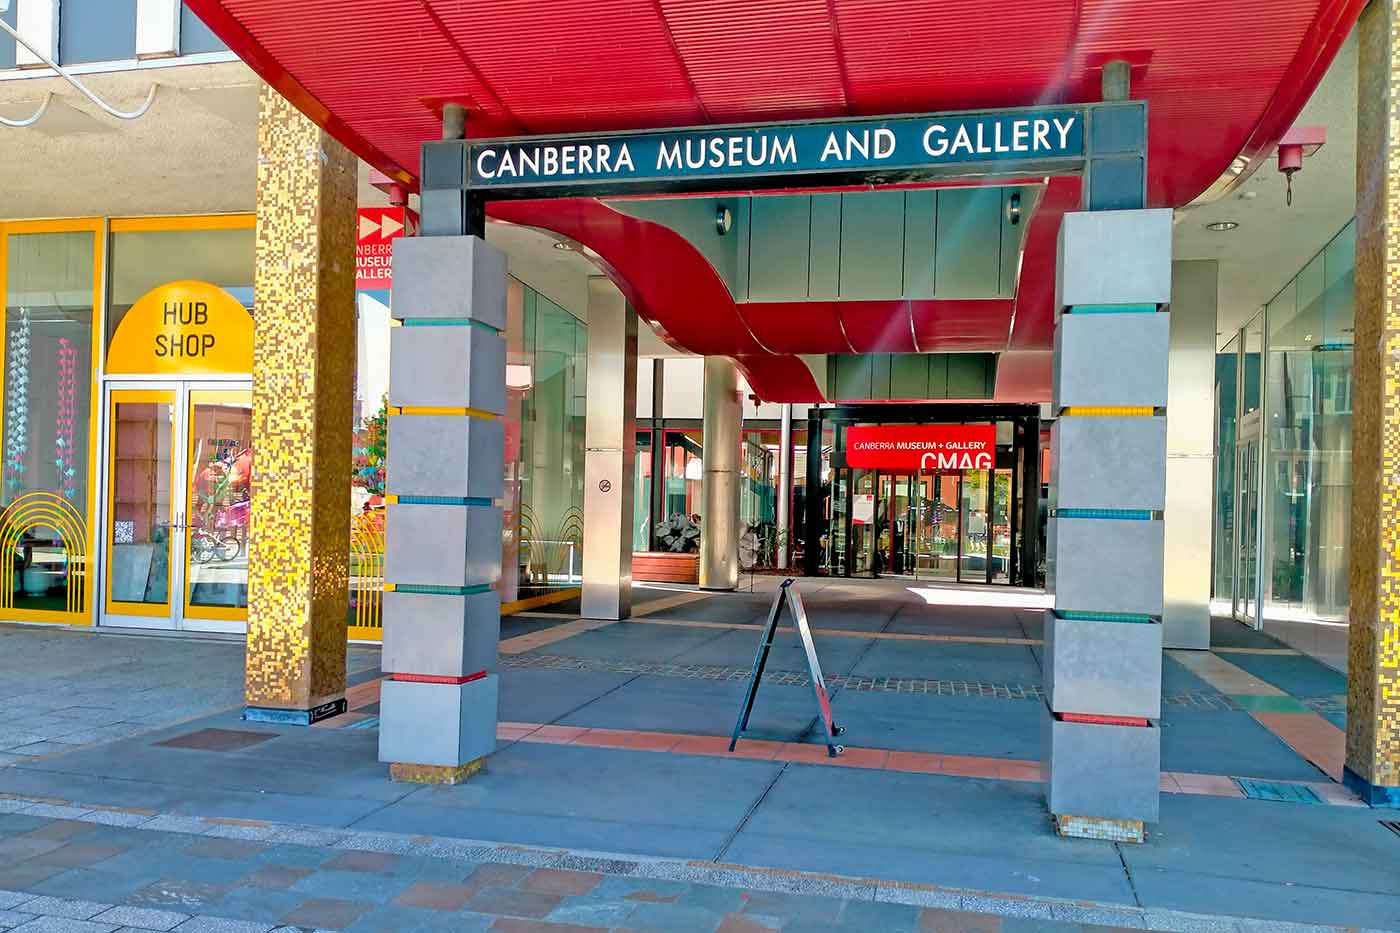 Canberra Museum & Gallery